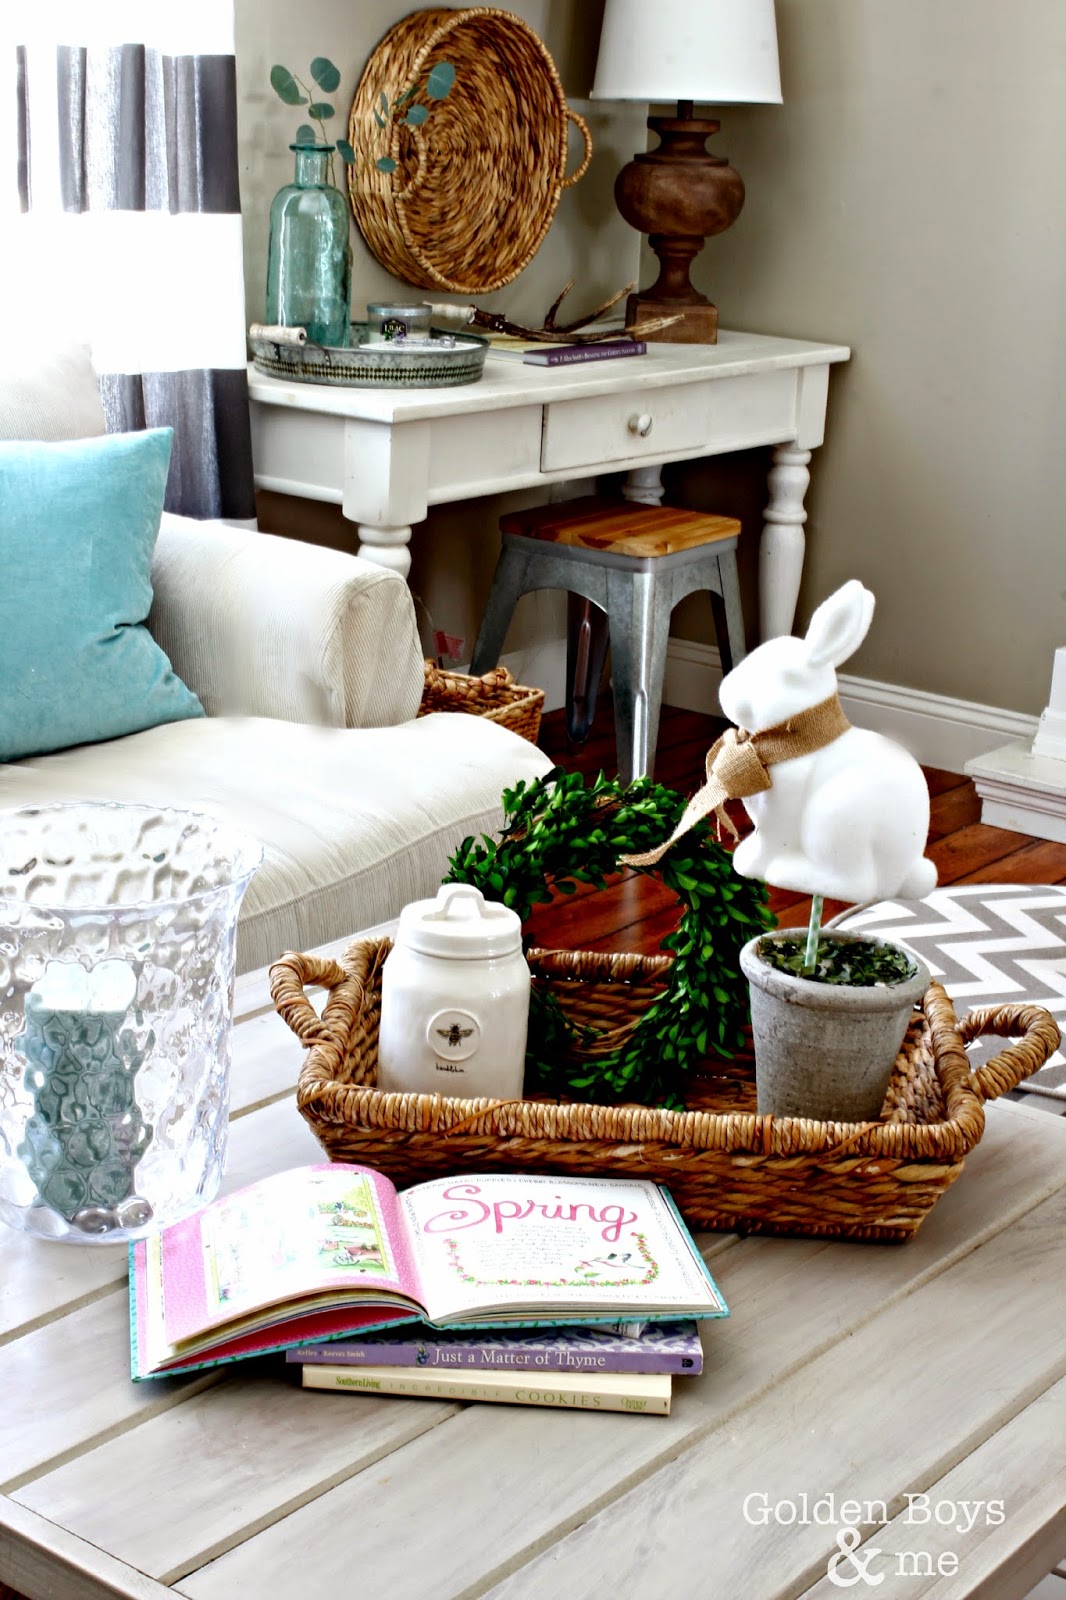 Target Dollar Spot bunny topiary in Smith and Hawken basket with spring decor-www.goldenboysandme.com